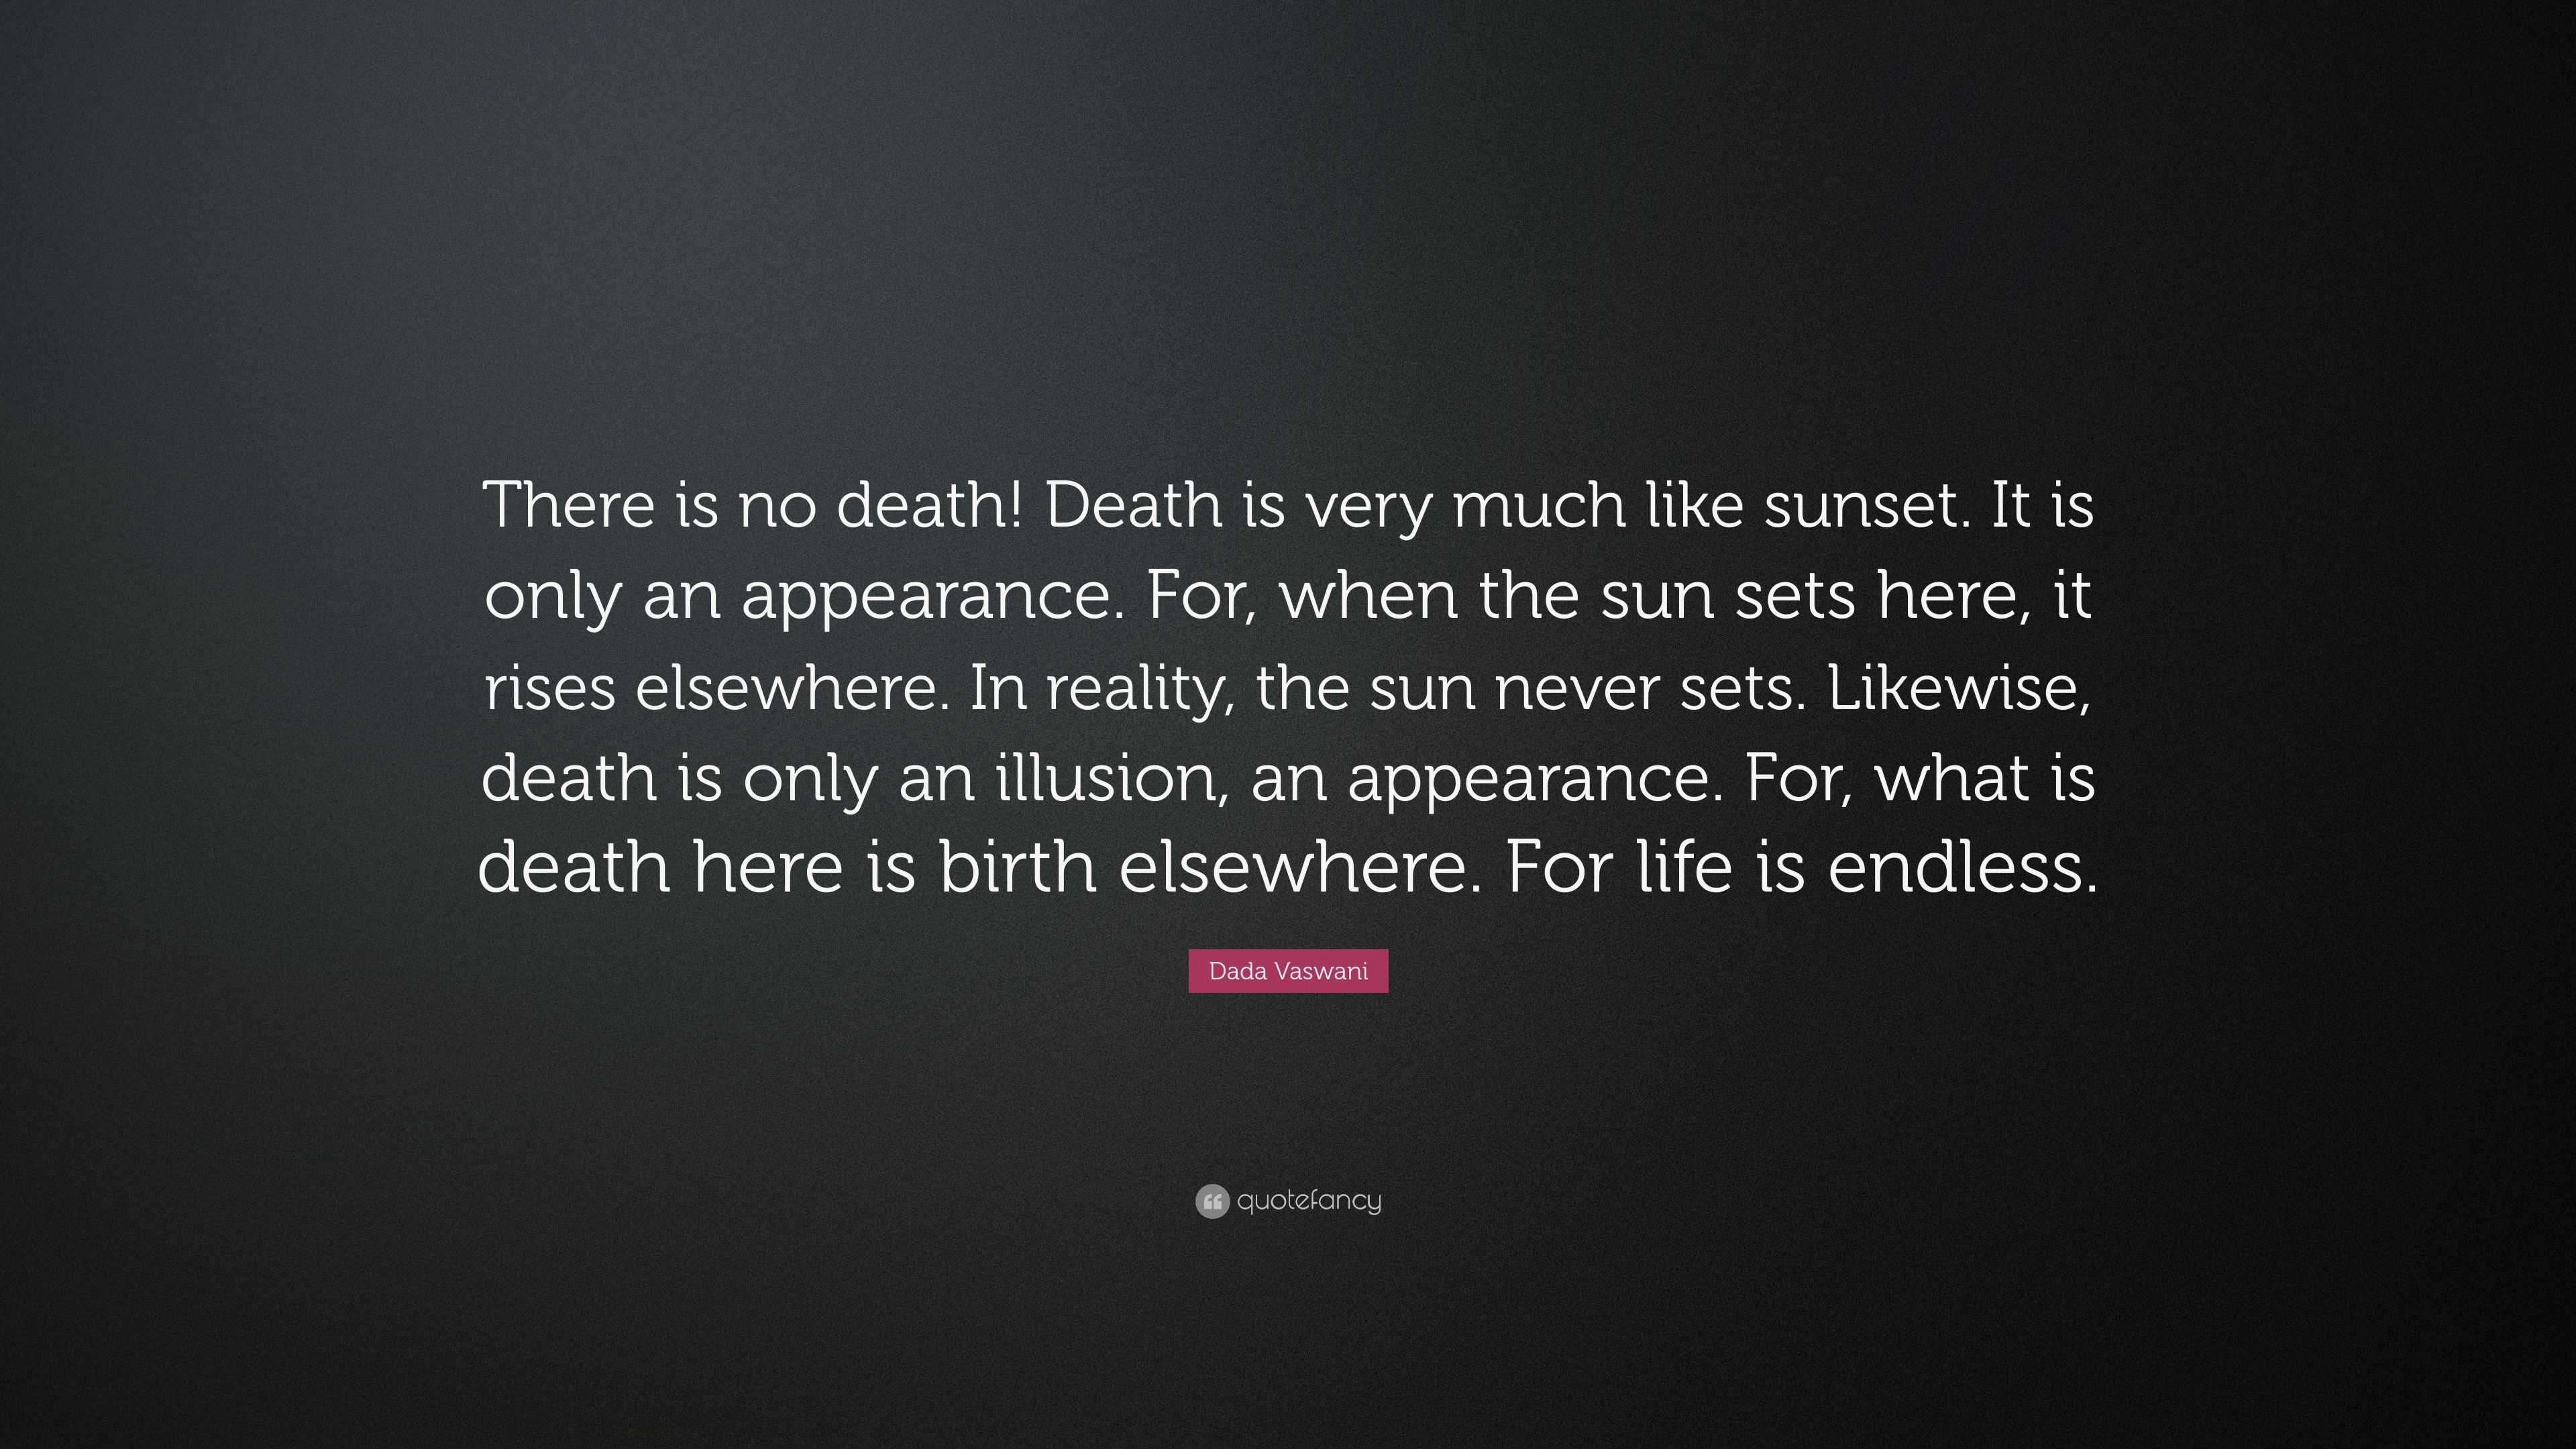 Dada Vaswani Quote: “There is no death! Death is very much like sunset ...